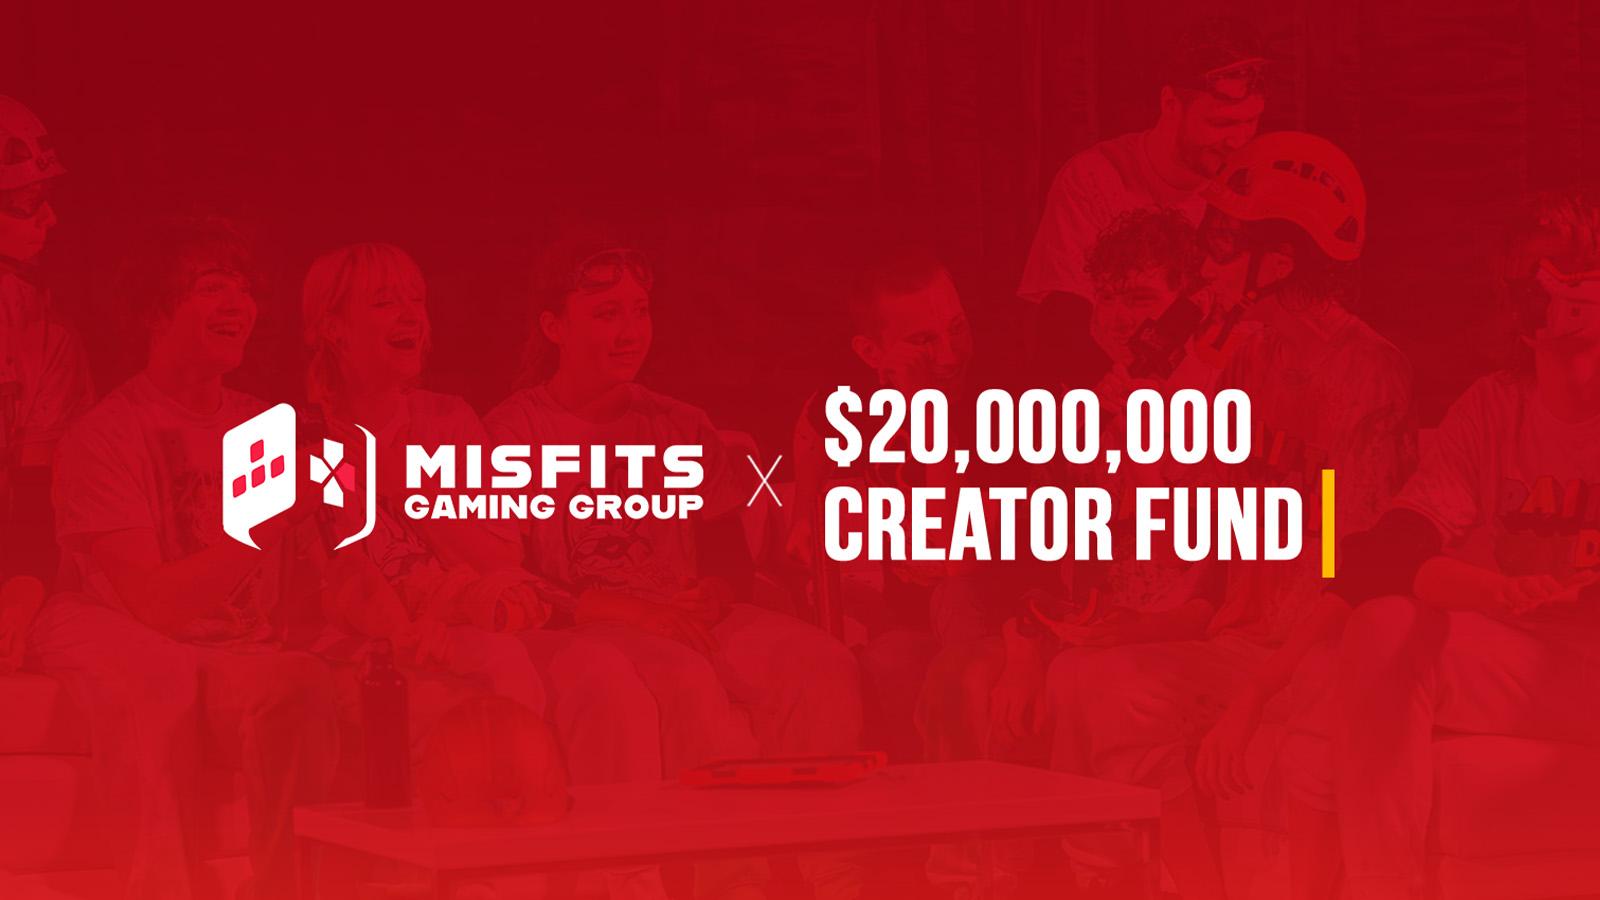 Misfits Creator Fund 20M new shows from Hikaru, Ranboo and more